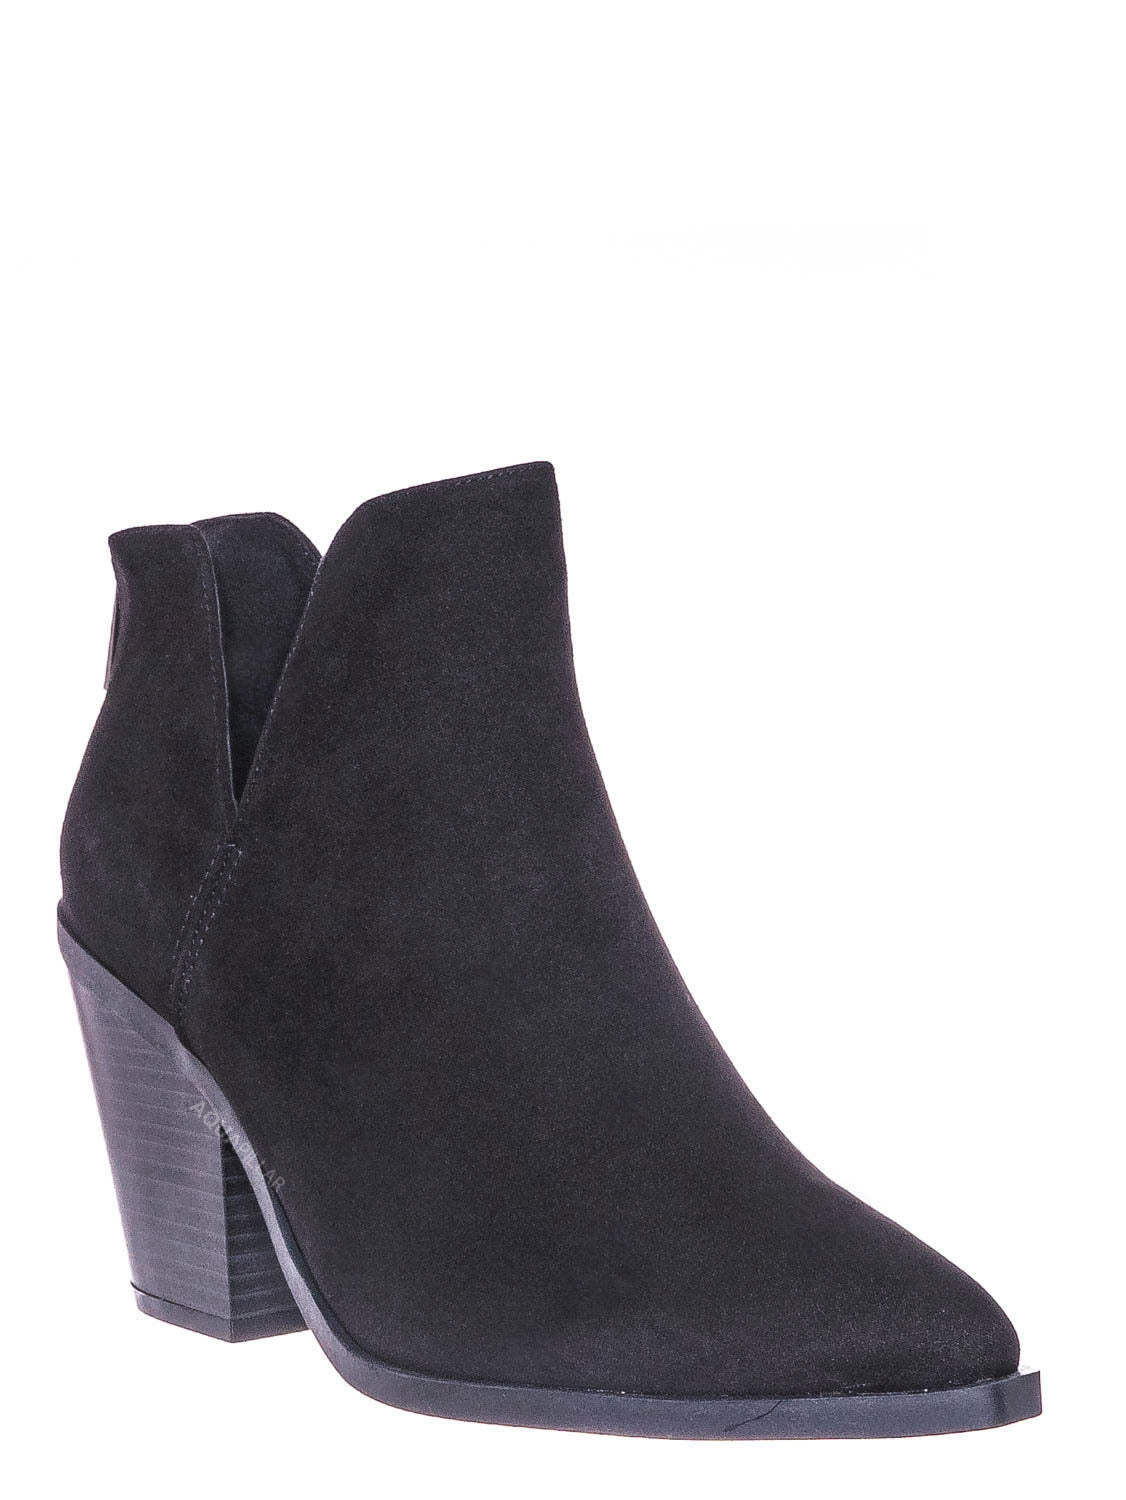 Black Faux Suede / Upstream01 Block Heel Side Cutout Bootie - Womens Double V-Cut Ankle Boots